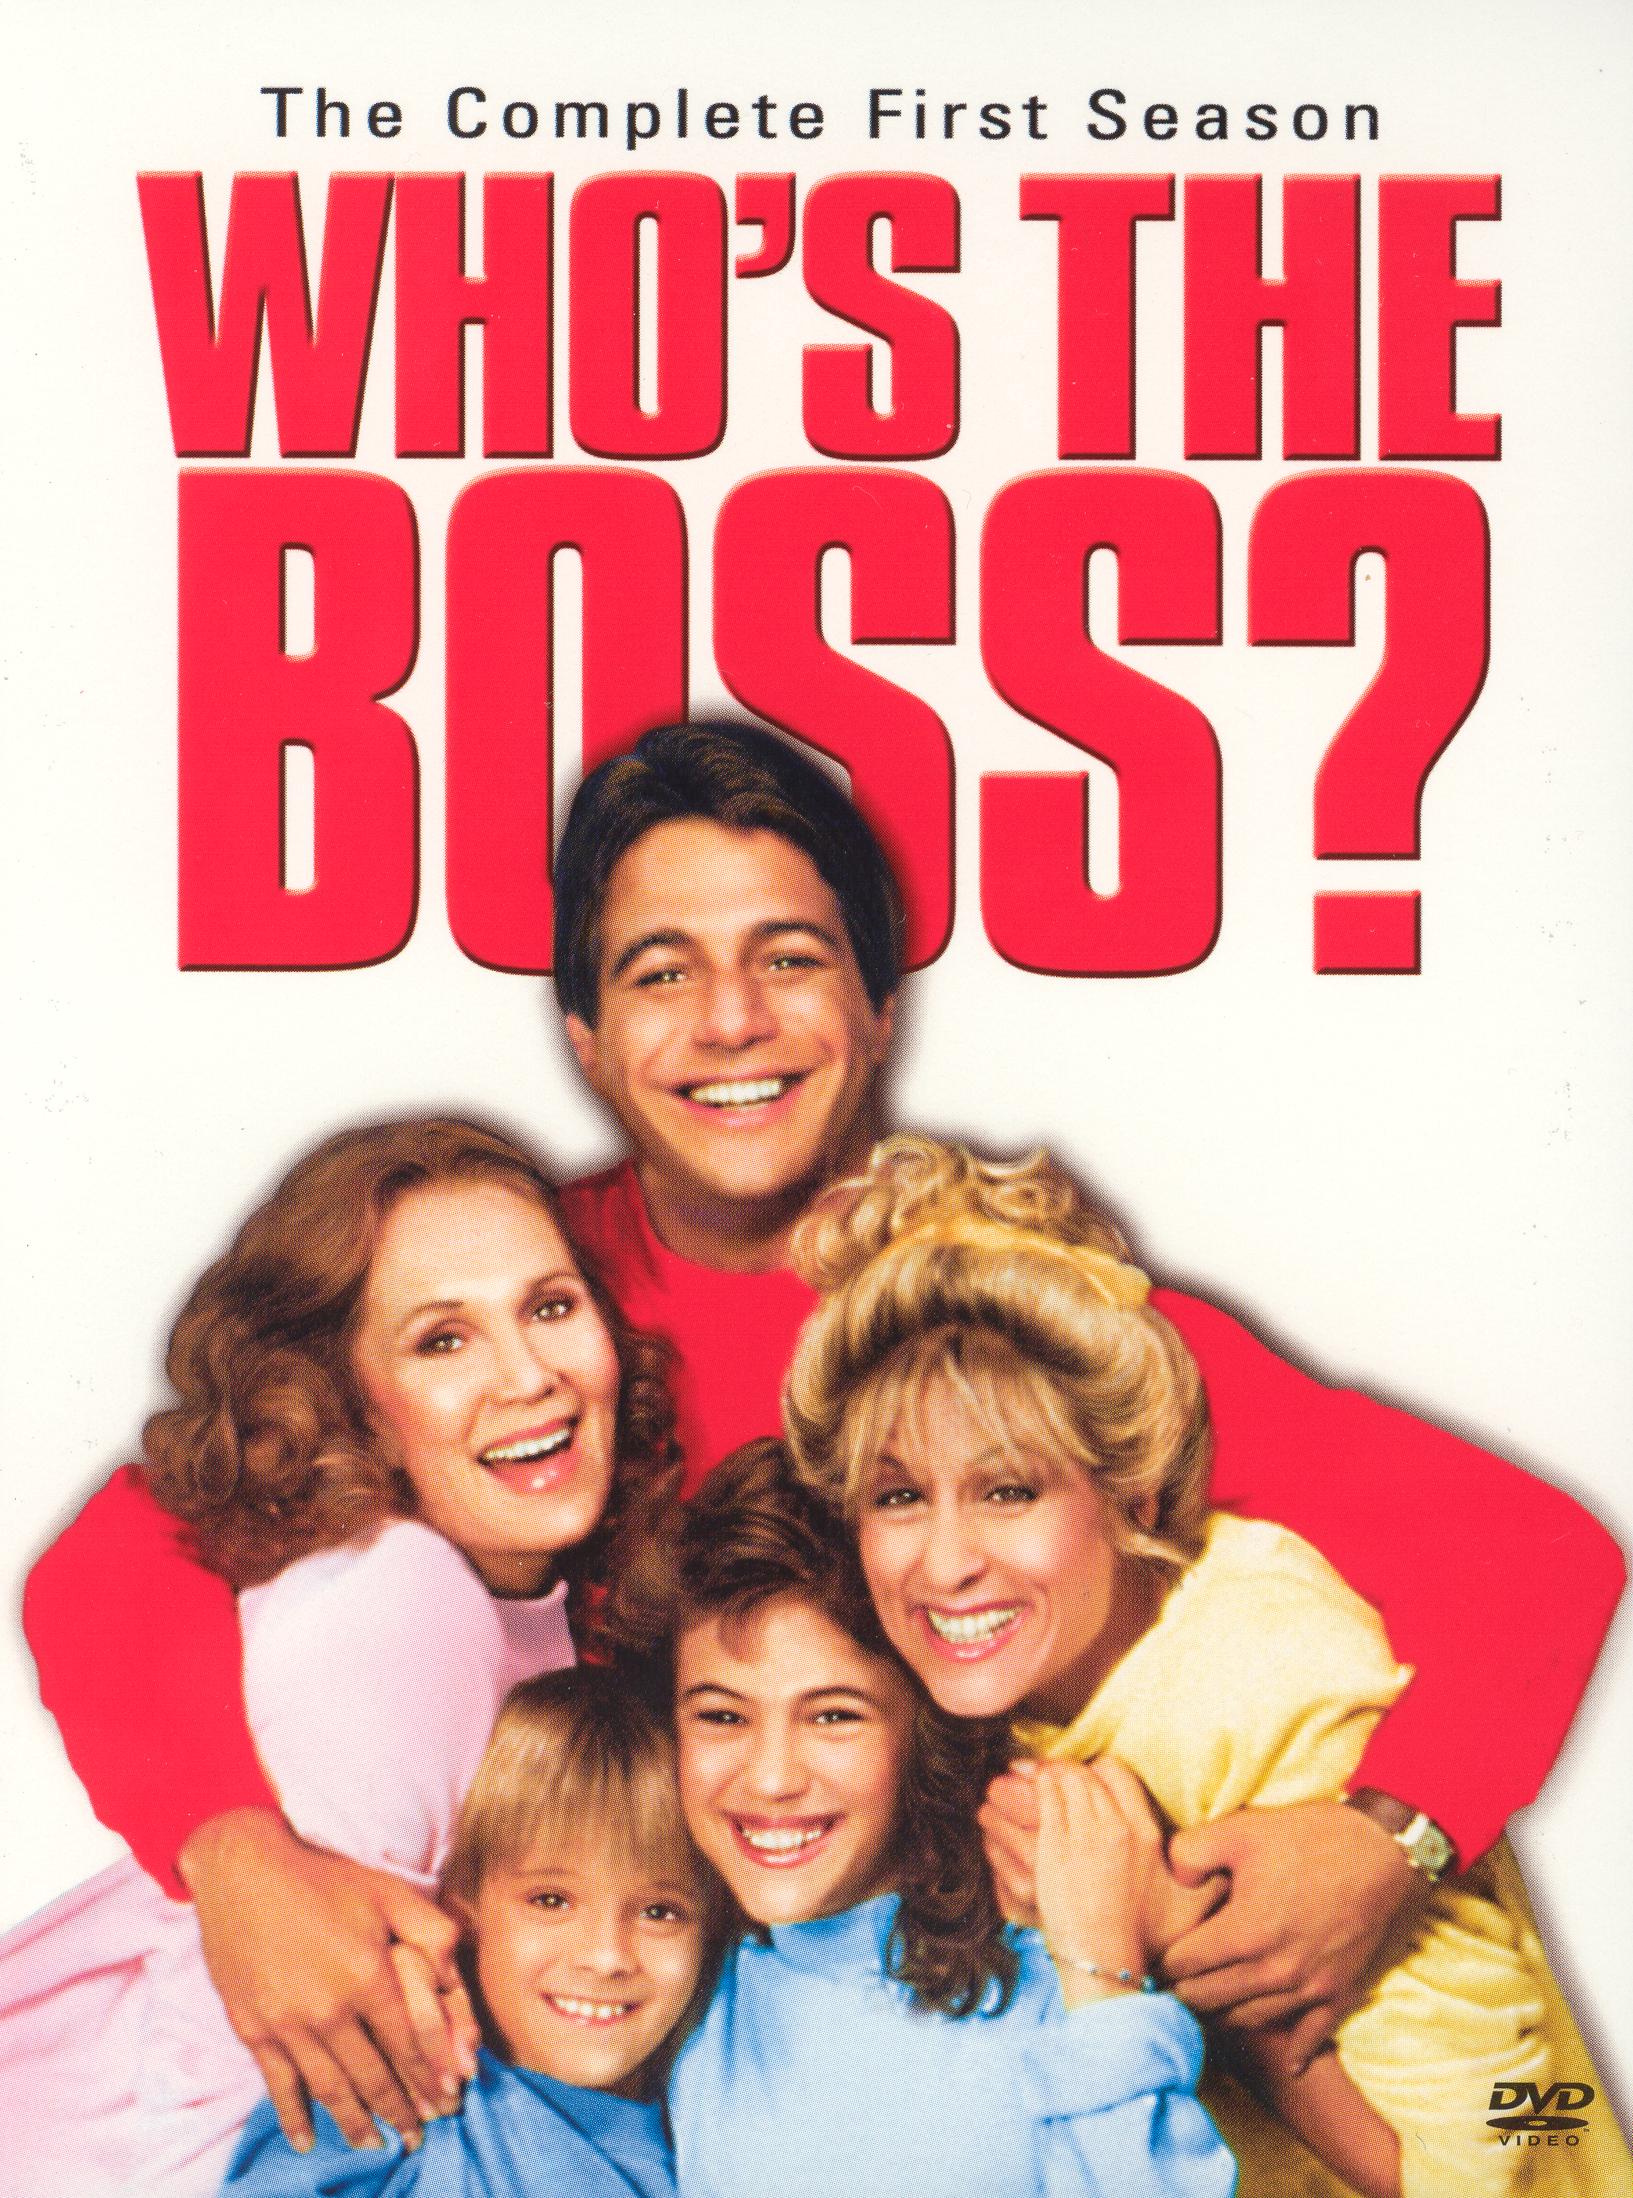 Whos The Boss - The Complete First Season 1 (DVD 3-Disc Set) TV